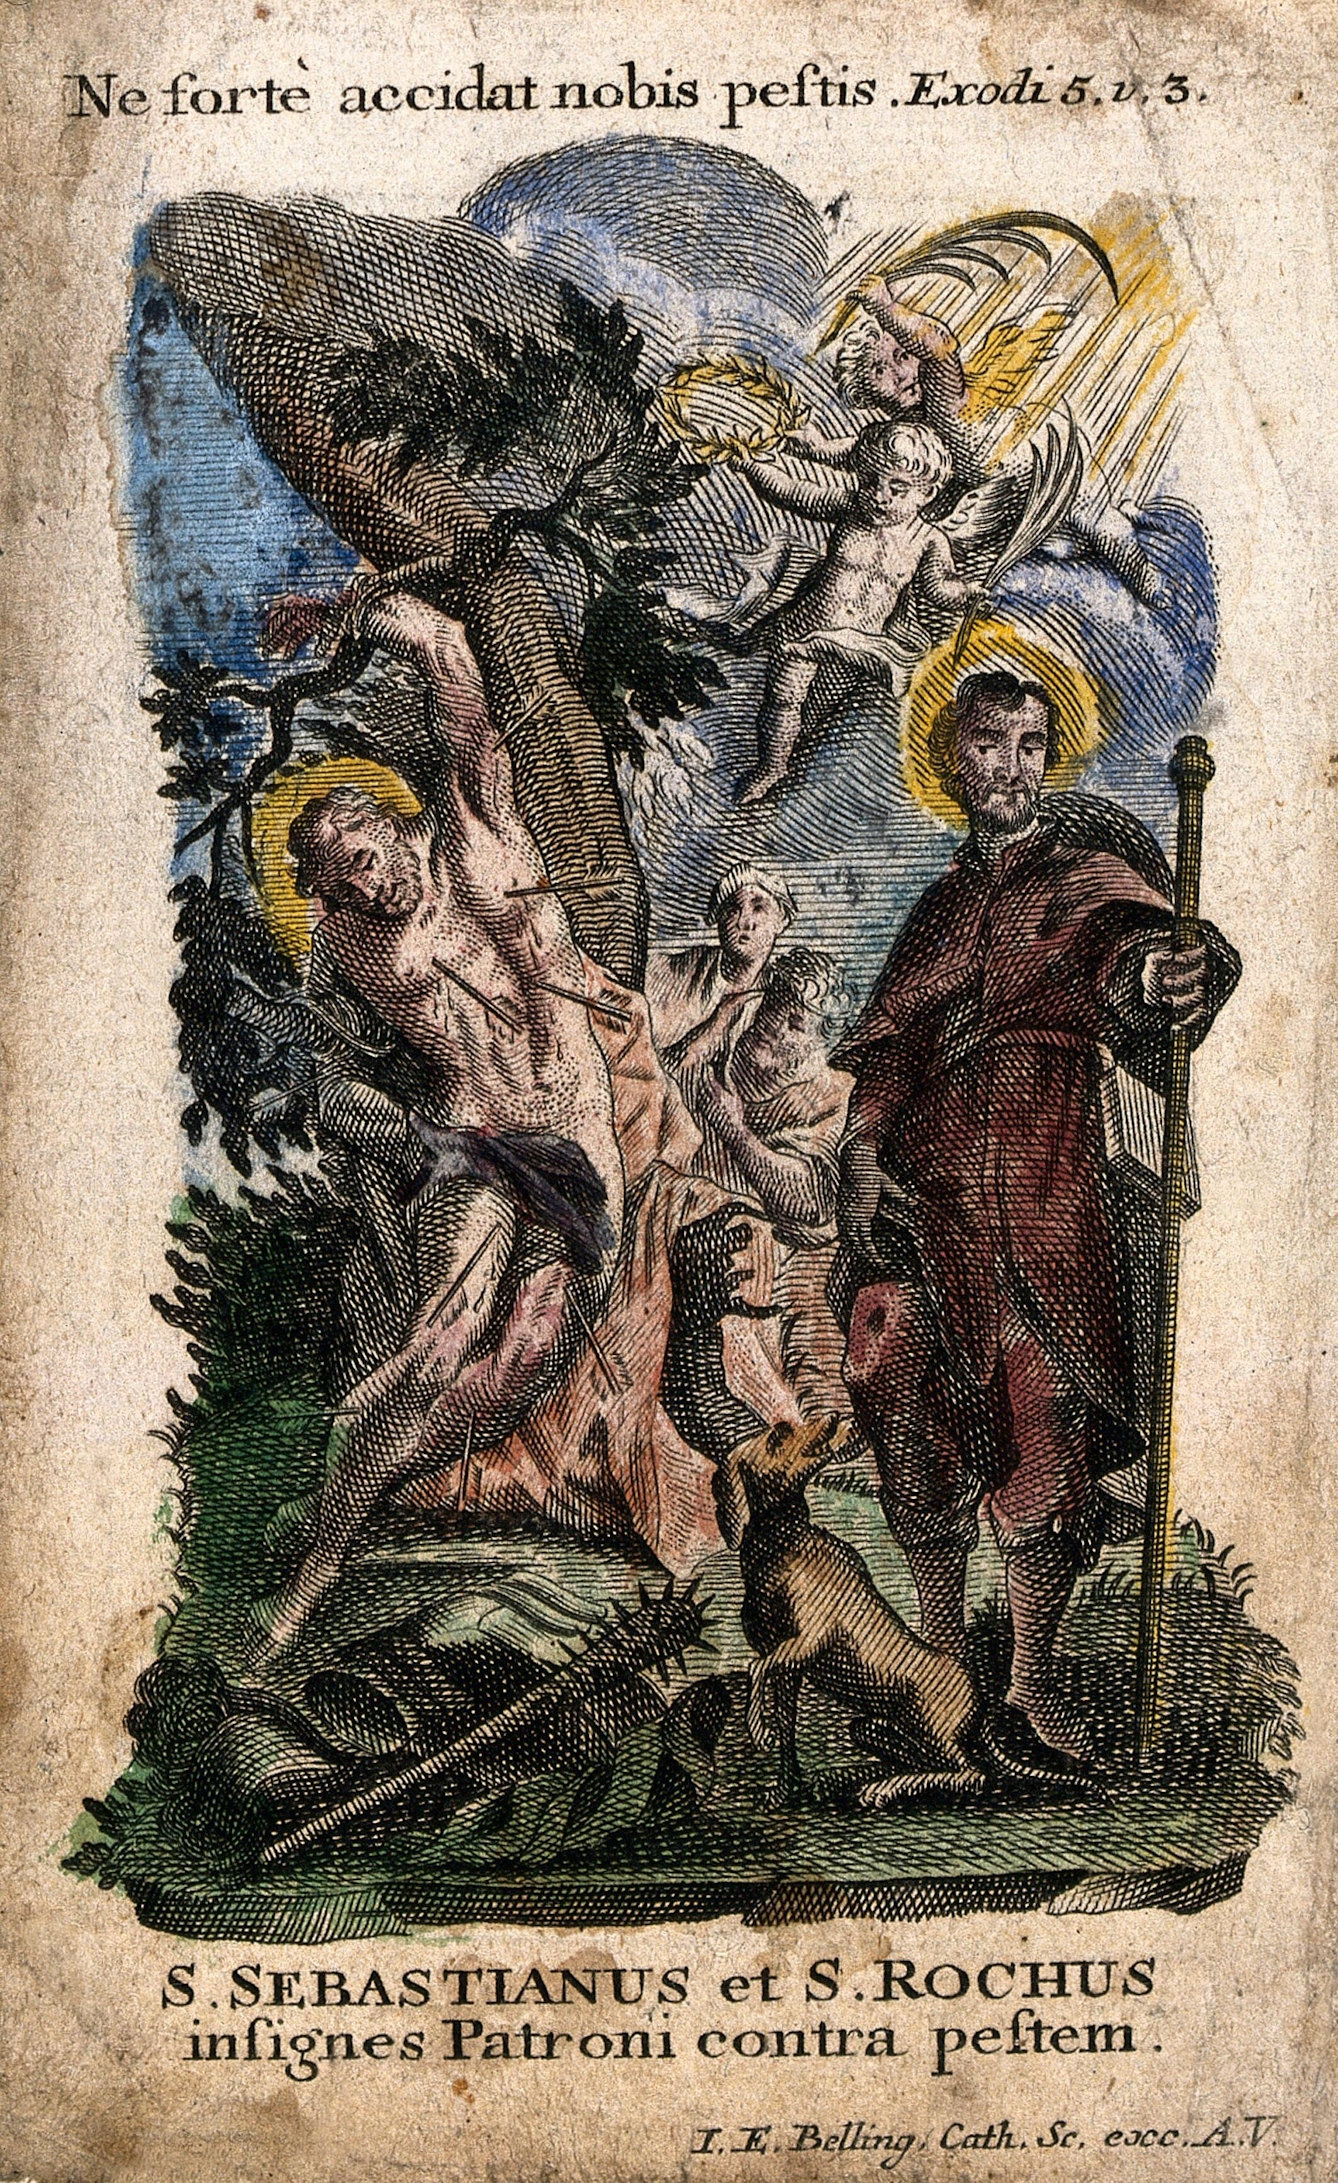 Coloured engraving showing St Sebastian, tied to a tree and shot full of arrows, and St Roch, with a dog and a staff. Each has a halo and above them are putti bearing laurel wreaths. Behind the tree, two ailing people lean and peer out towards the saints. 